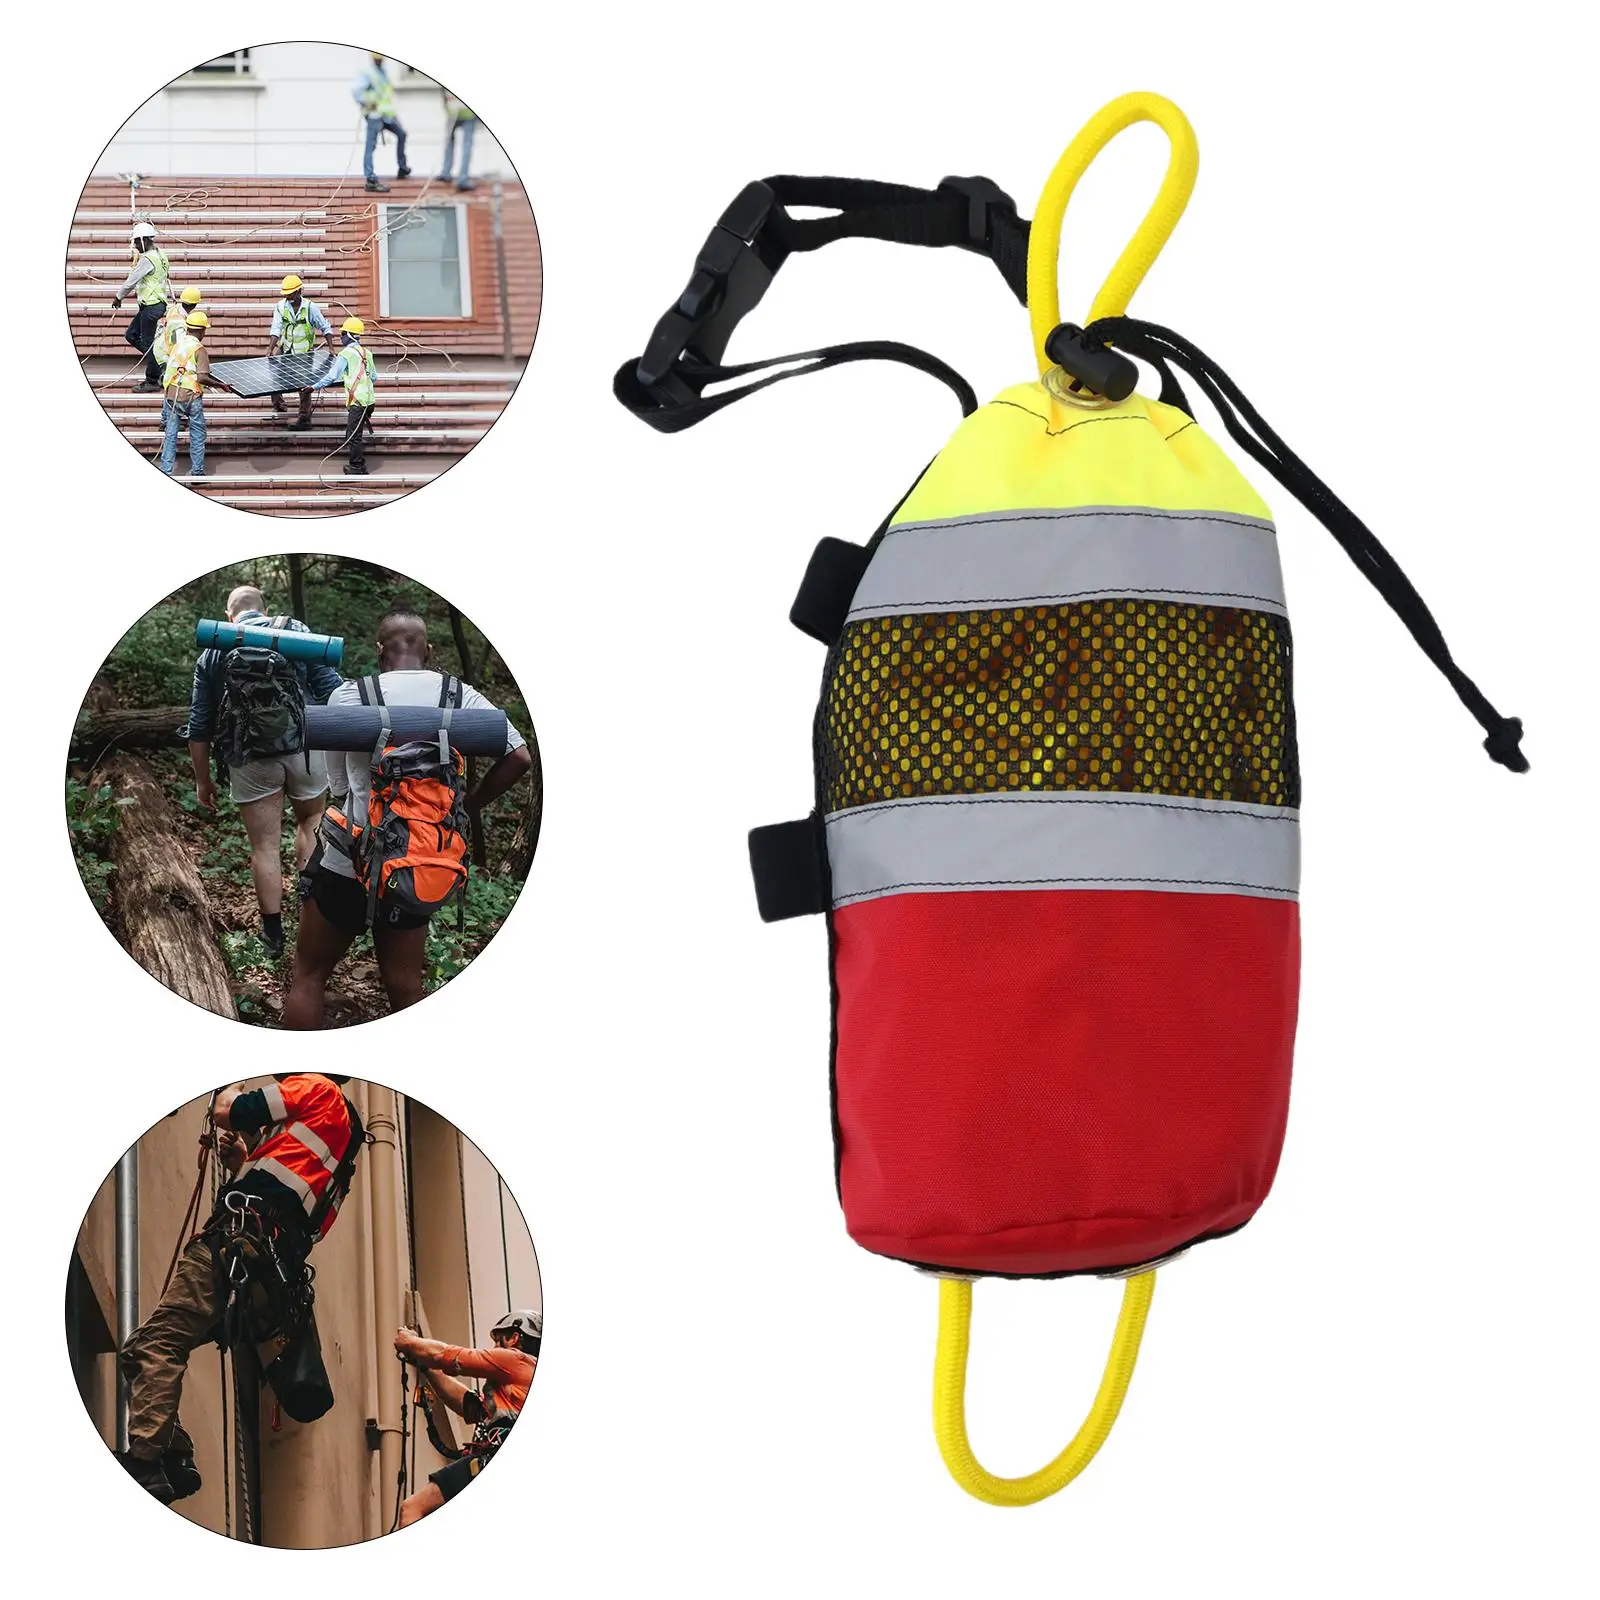 Rescue Throw Bag High Visibility Throwline Floating Throw Bag for Kayaking